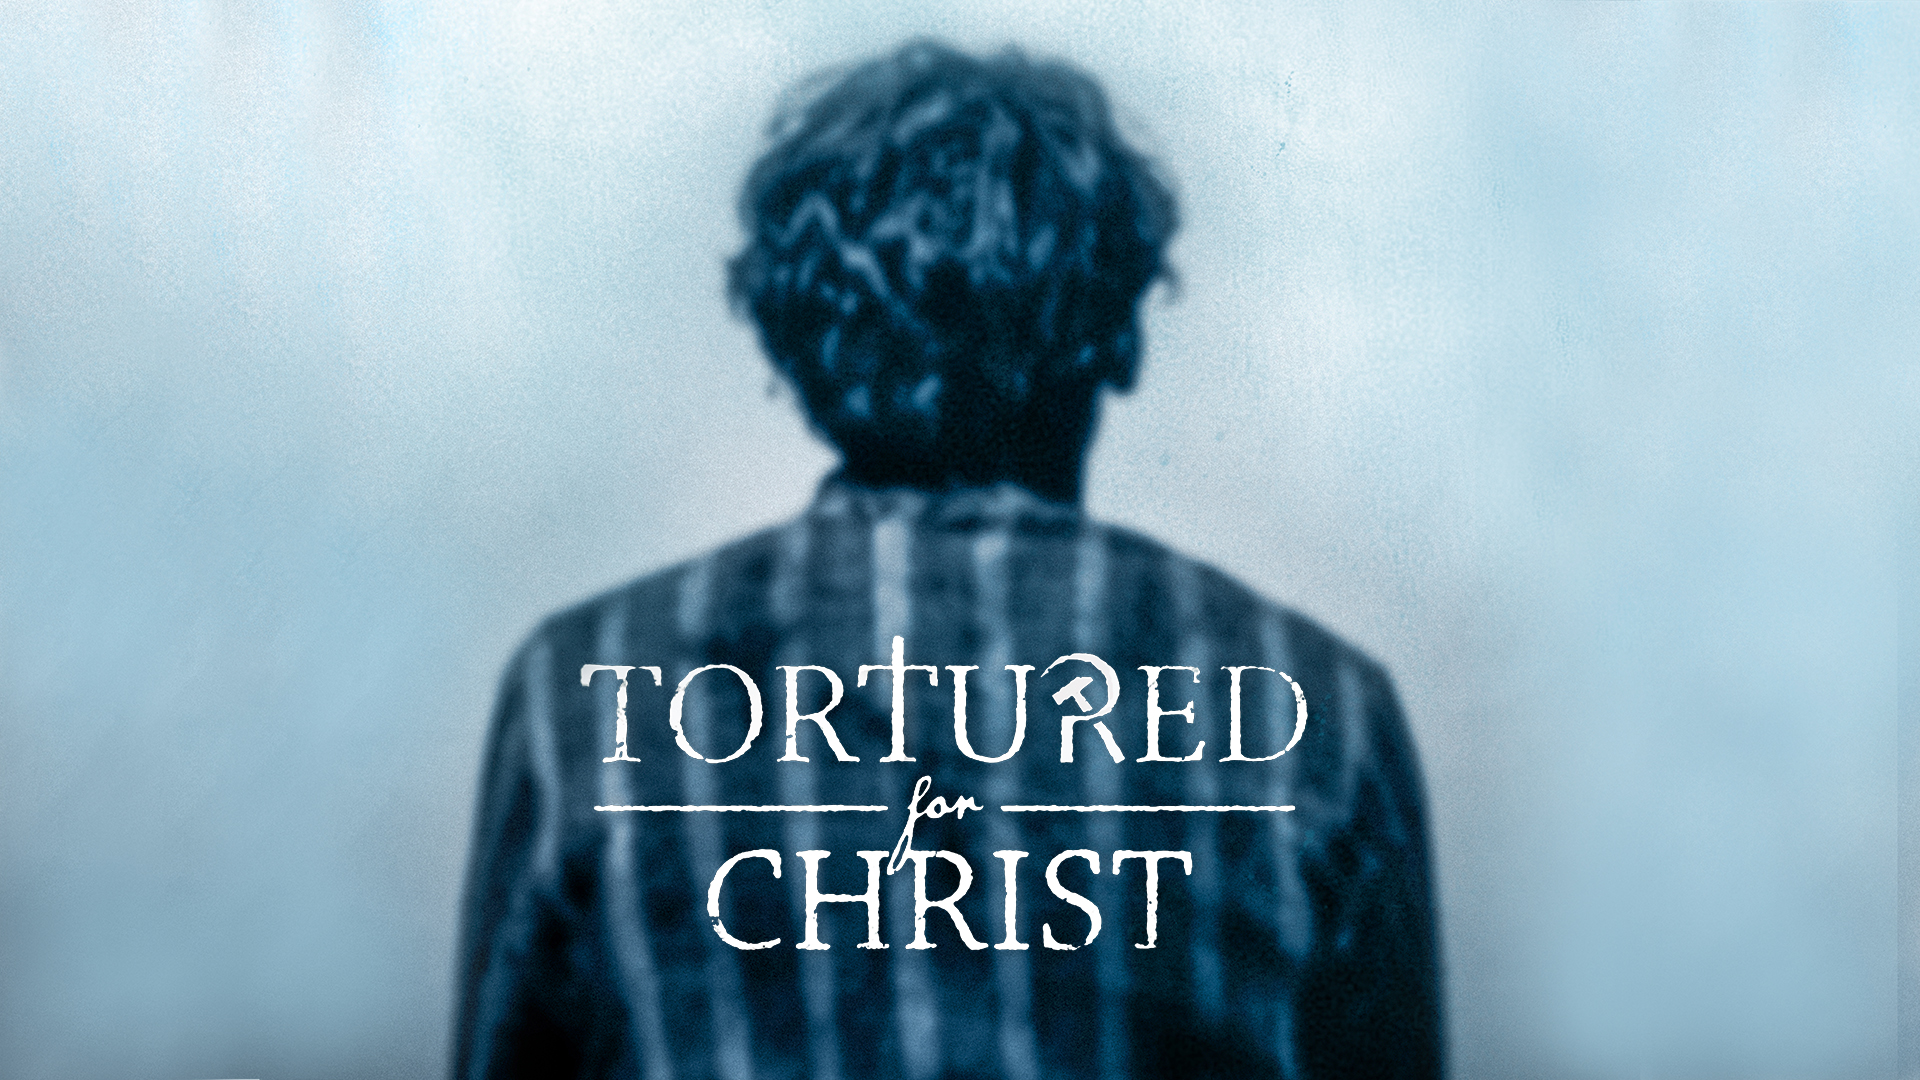 the movie tortured for christ